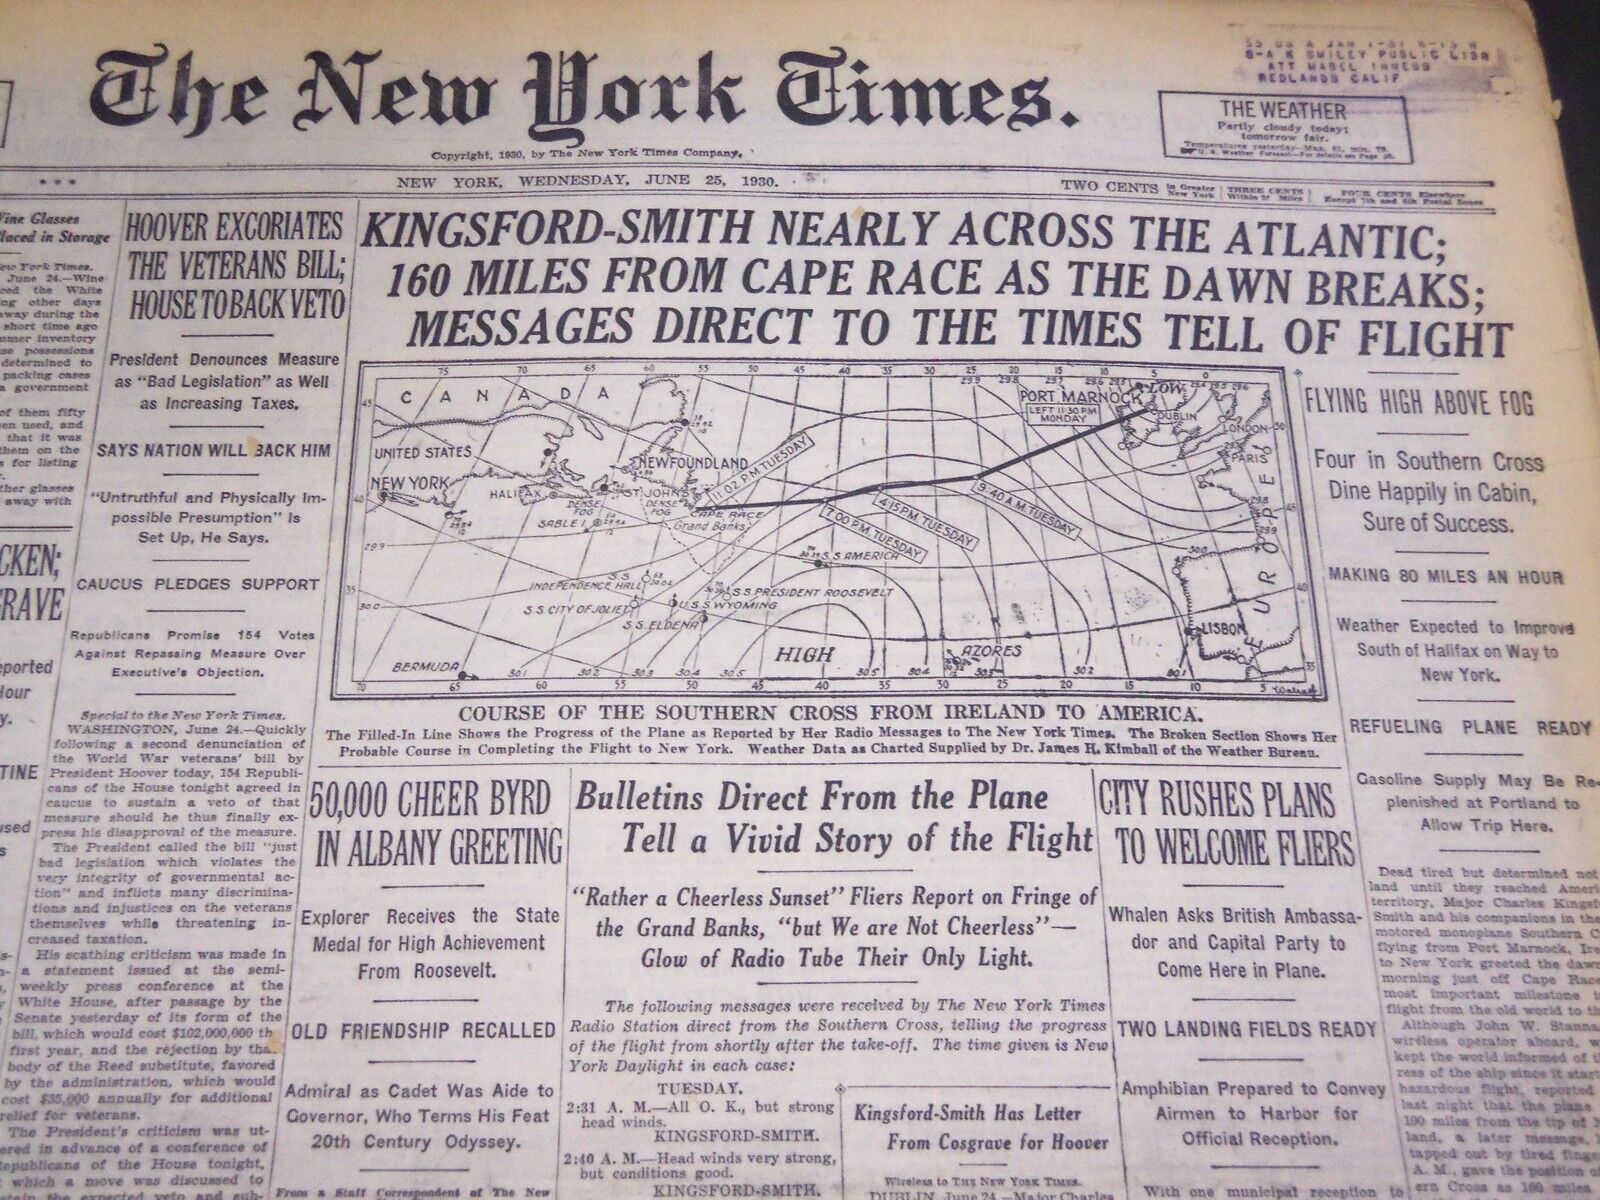 1930 JUNE 25 NEW YORK TIMES -KINGSFORD-SMITH NEARLY ACROSS THE ATLANTIC- NT 4937